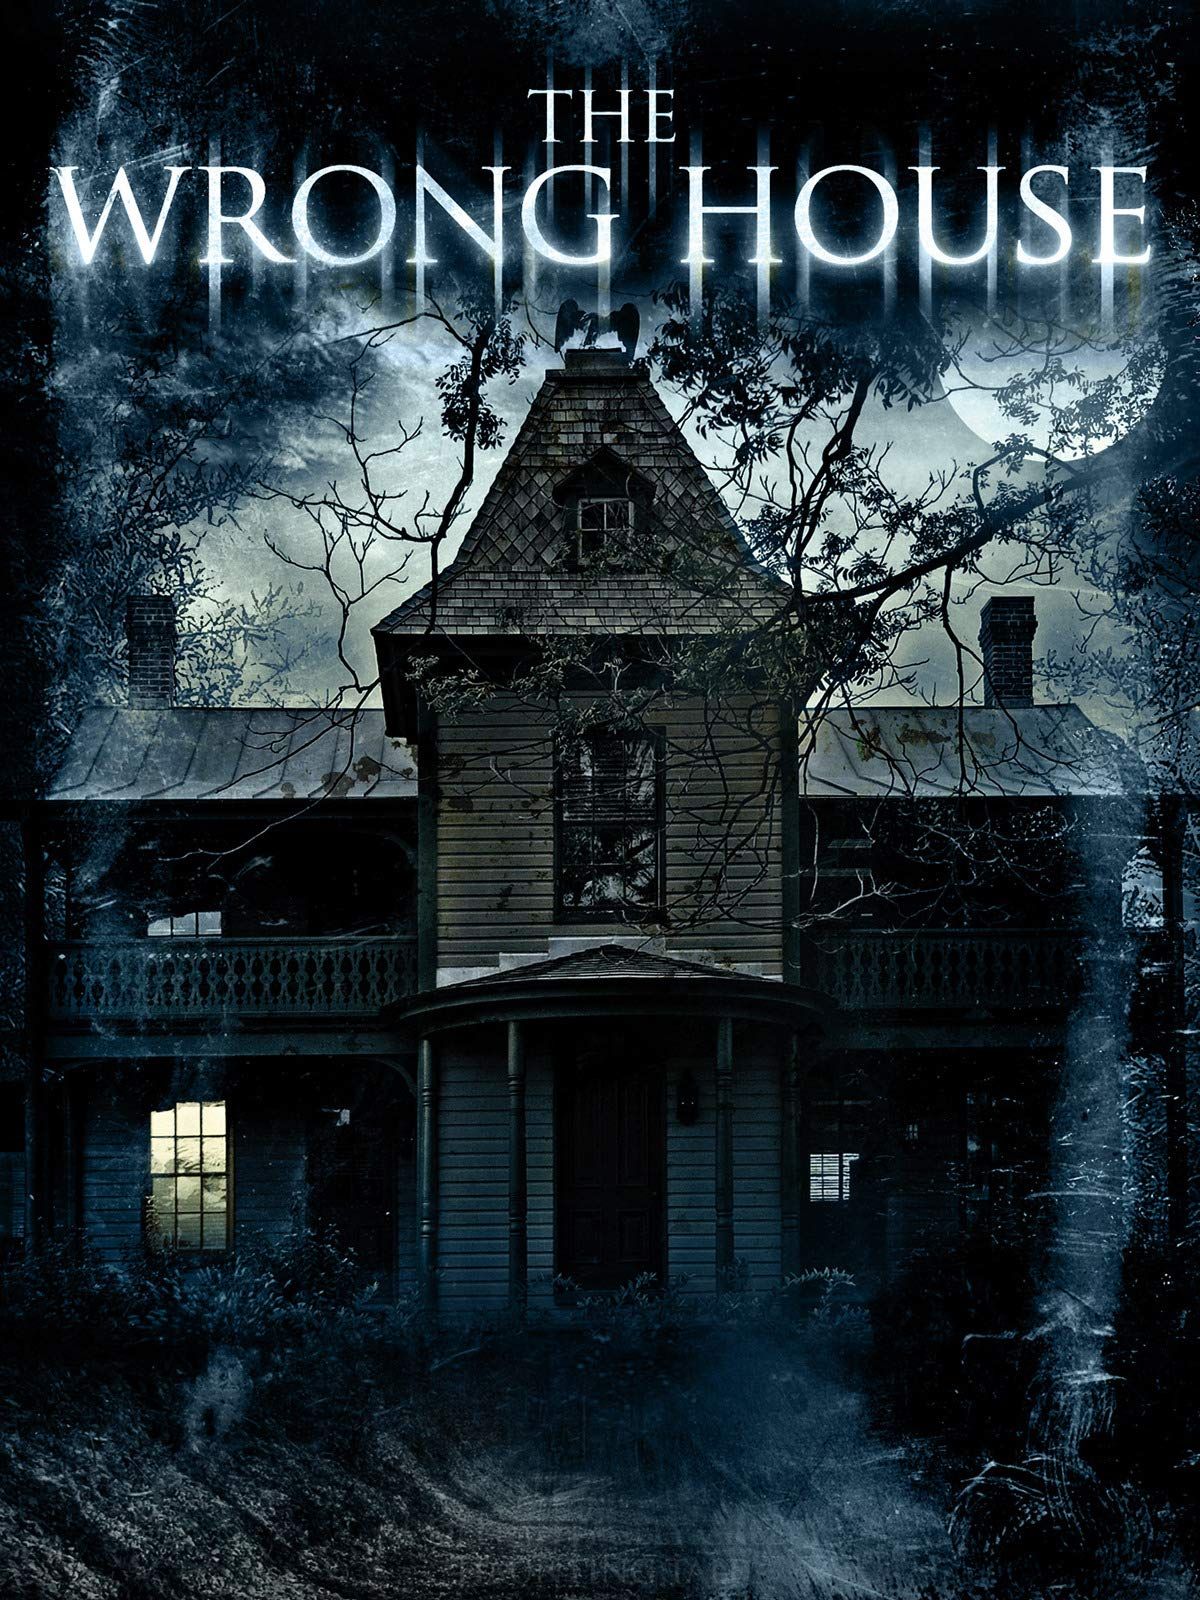 House Hunting - The Wrong House online film